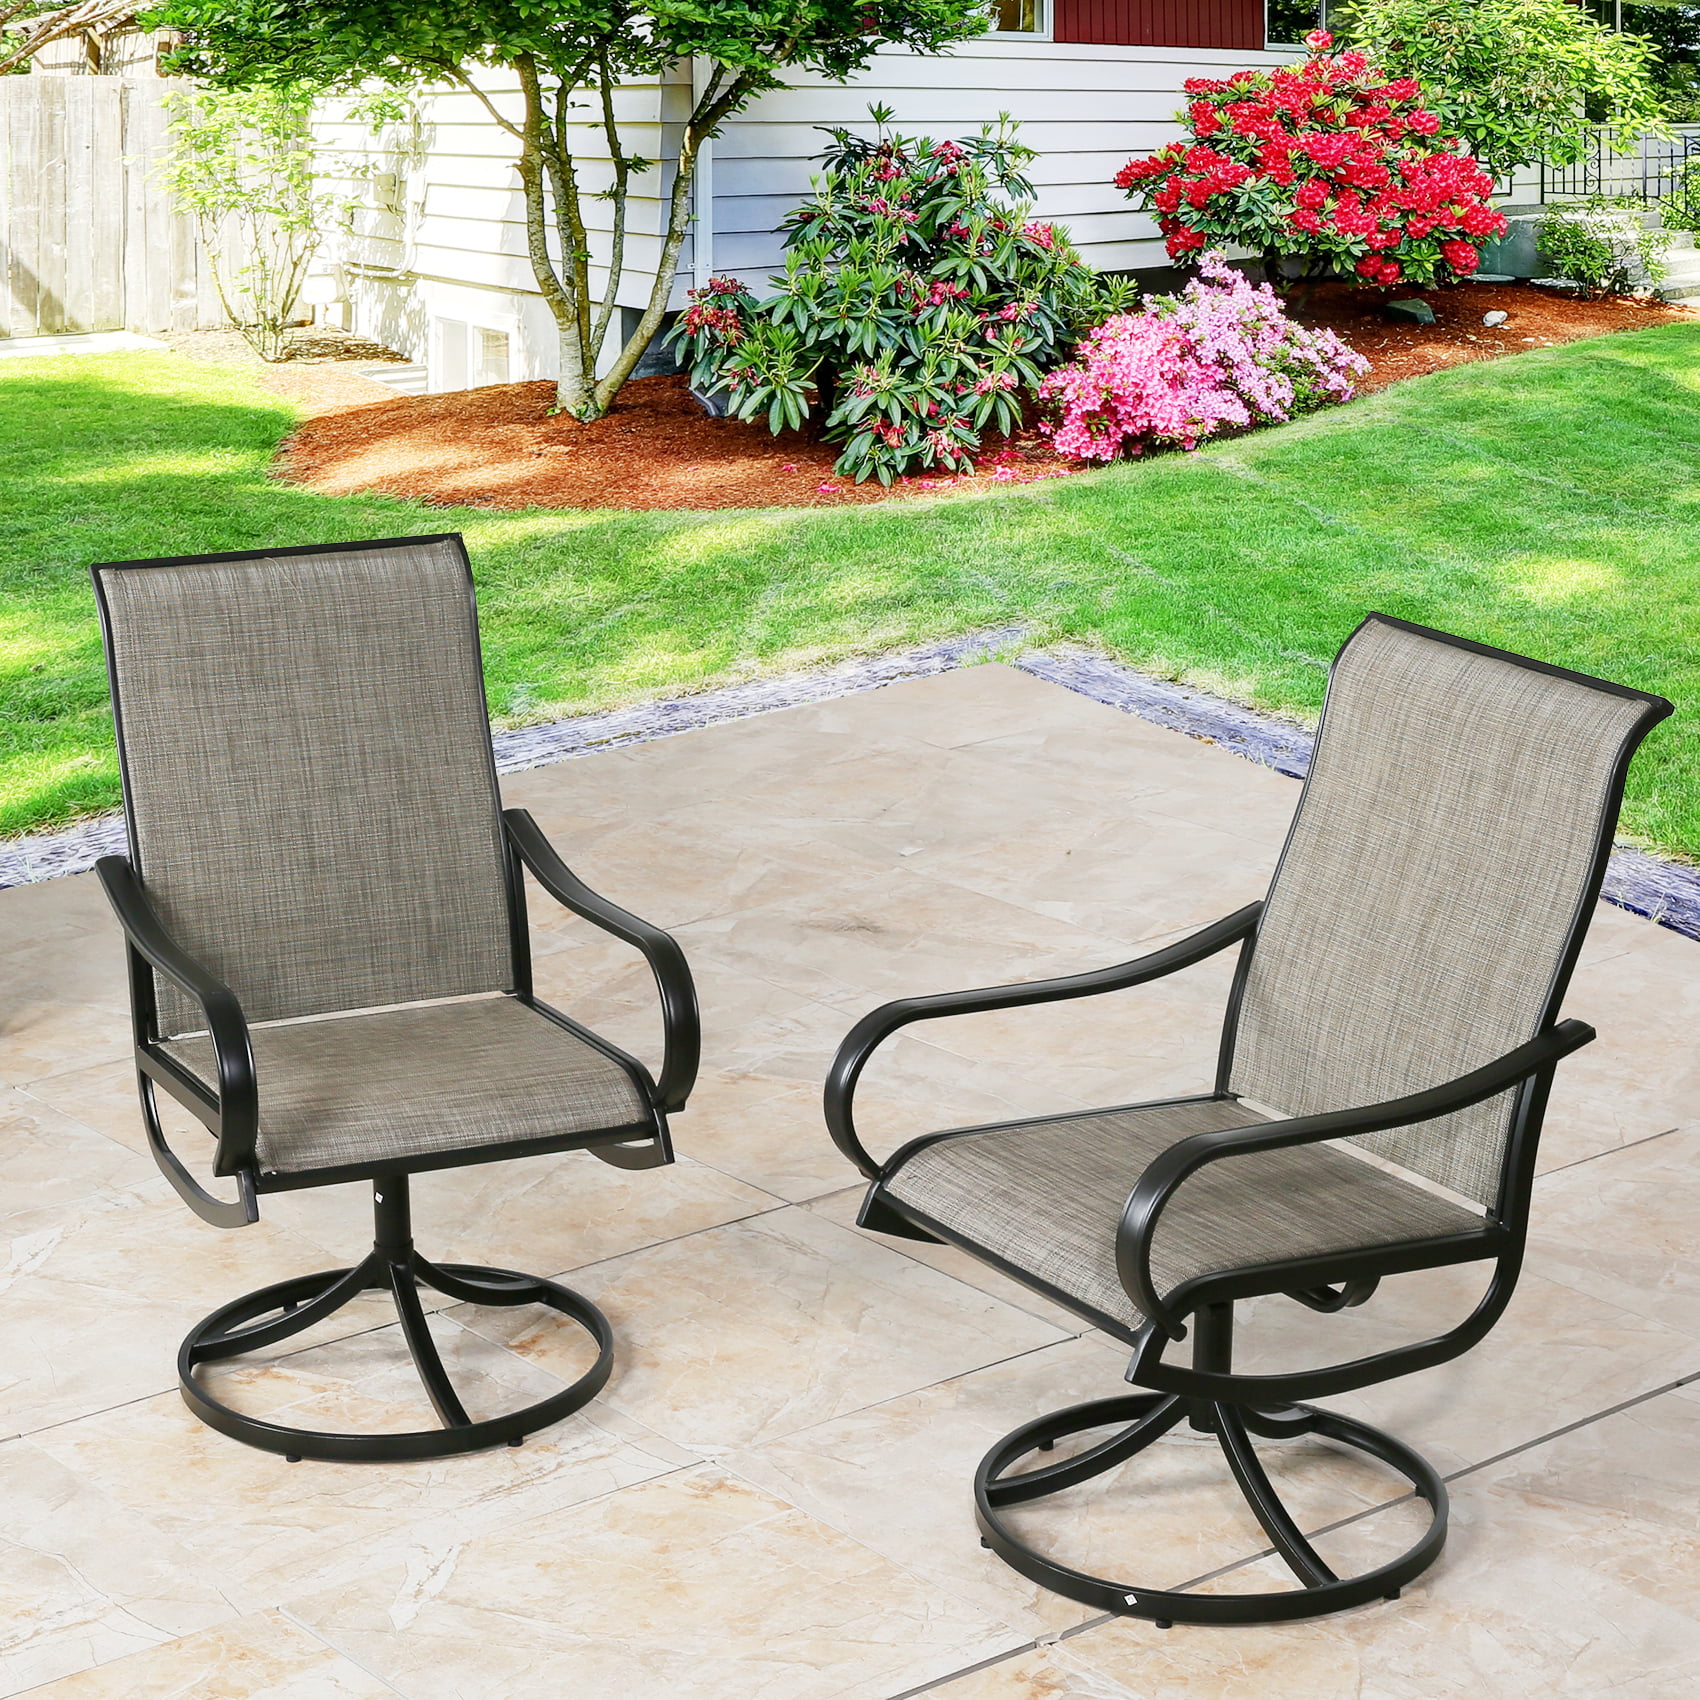 Ulax Furniture Patio Textilene Mesh, Fabric By The Yard For Outdoor Furniture